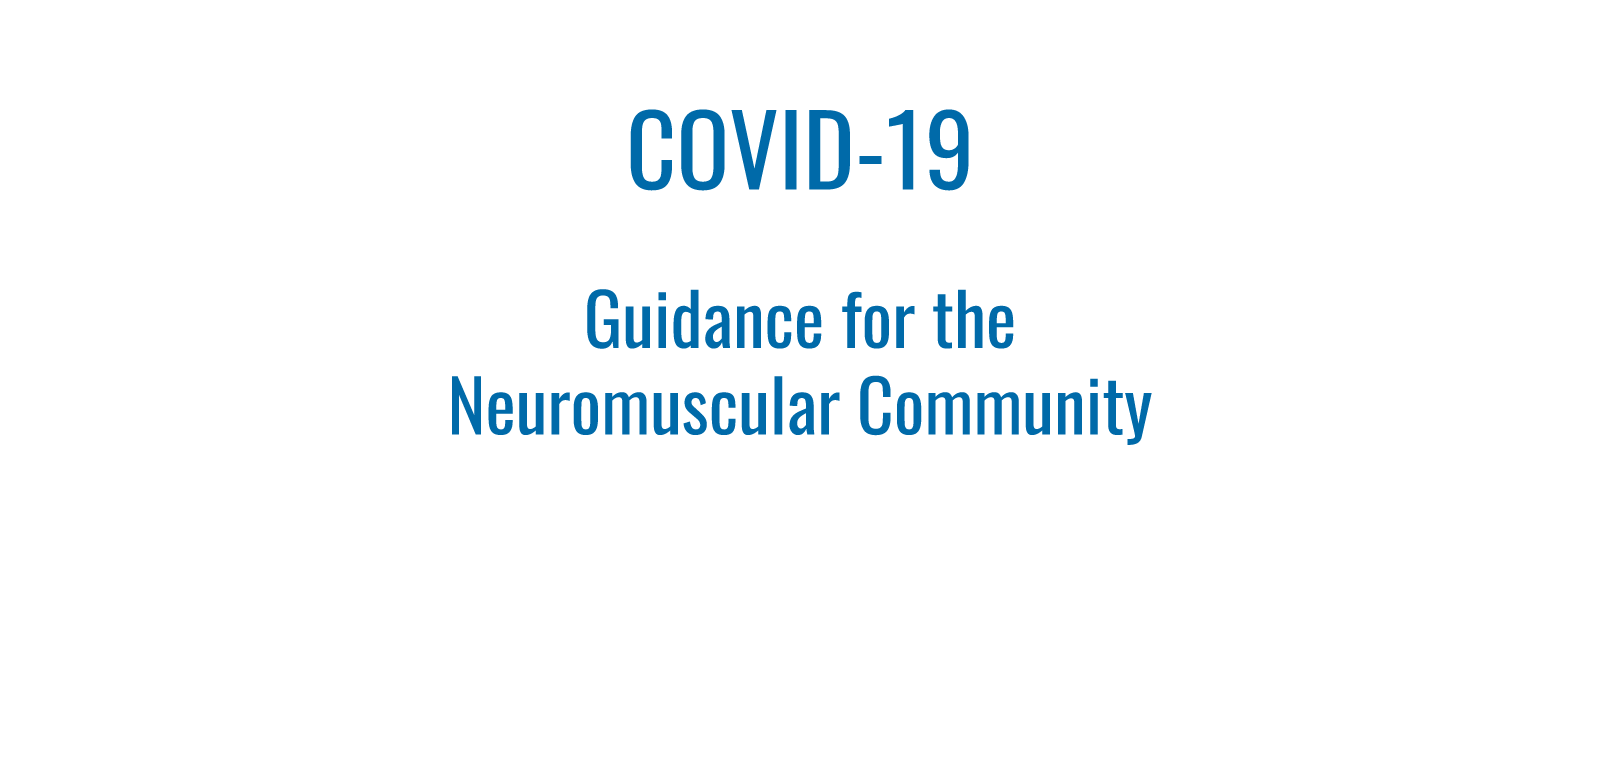 COVID-19 and Neuromuscular Patients